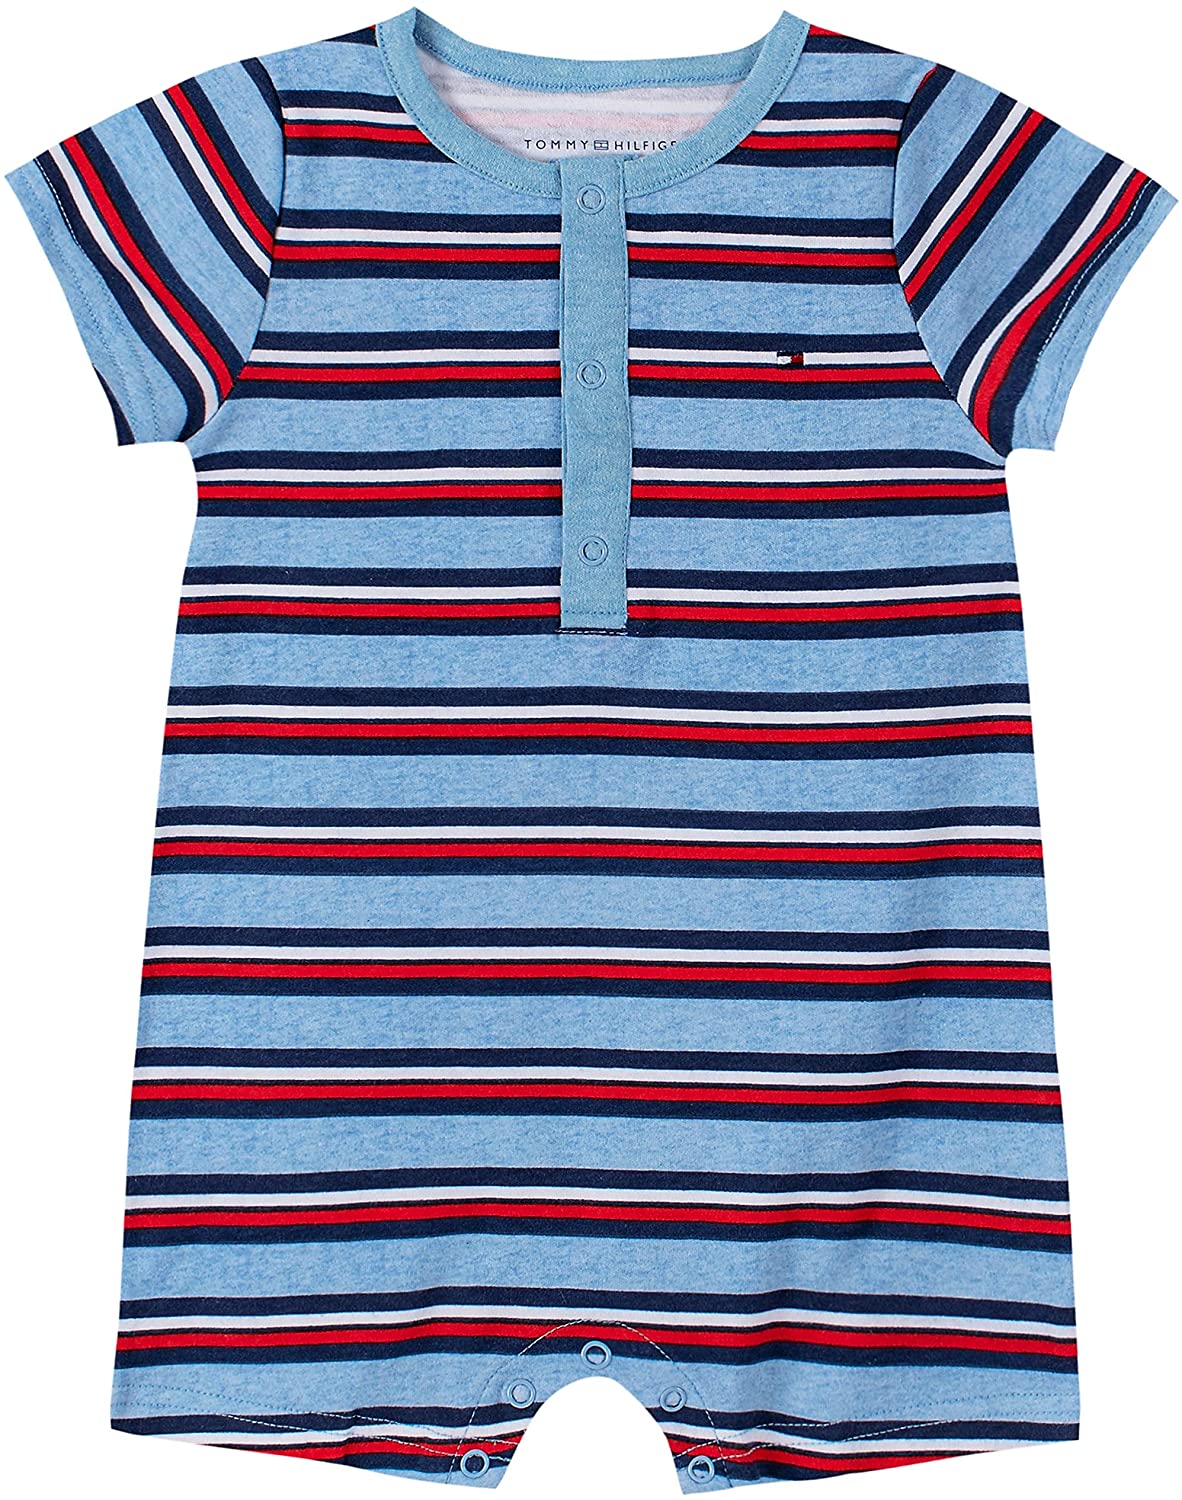 SAY YAS CLOTHING Baby Boys' Romper Navy/Red Stripes